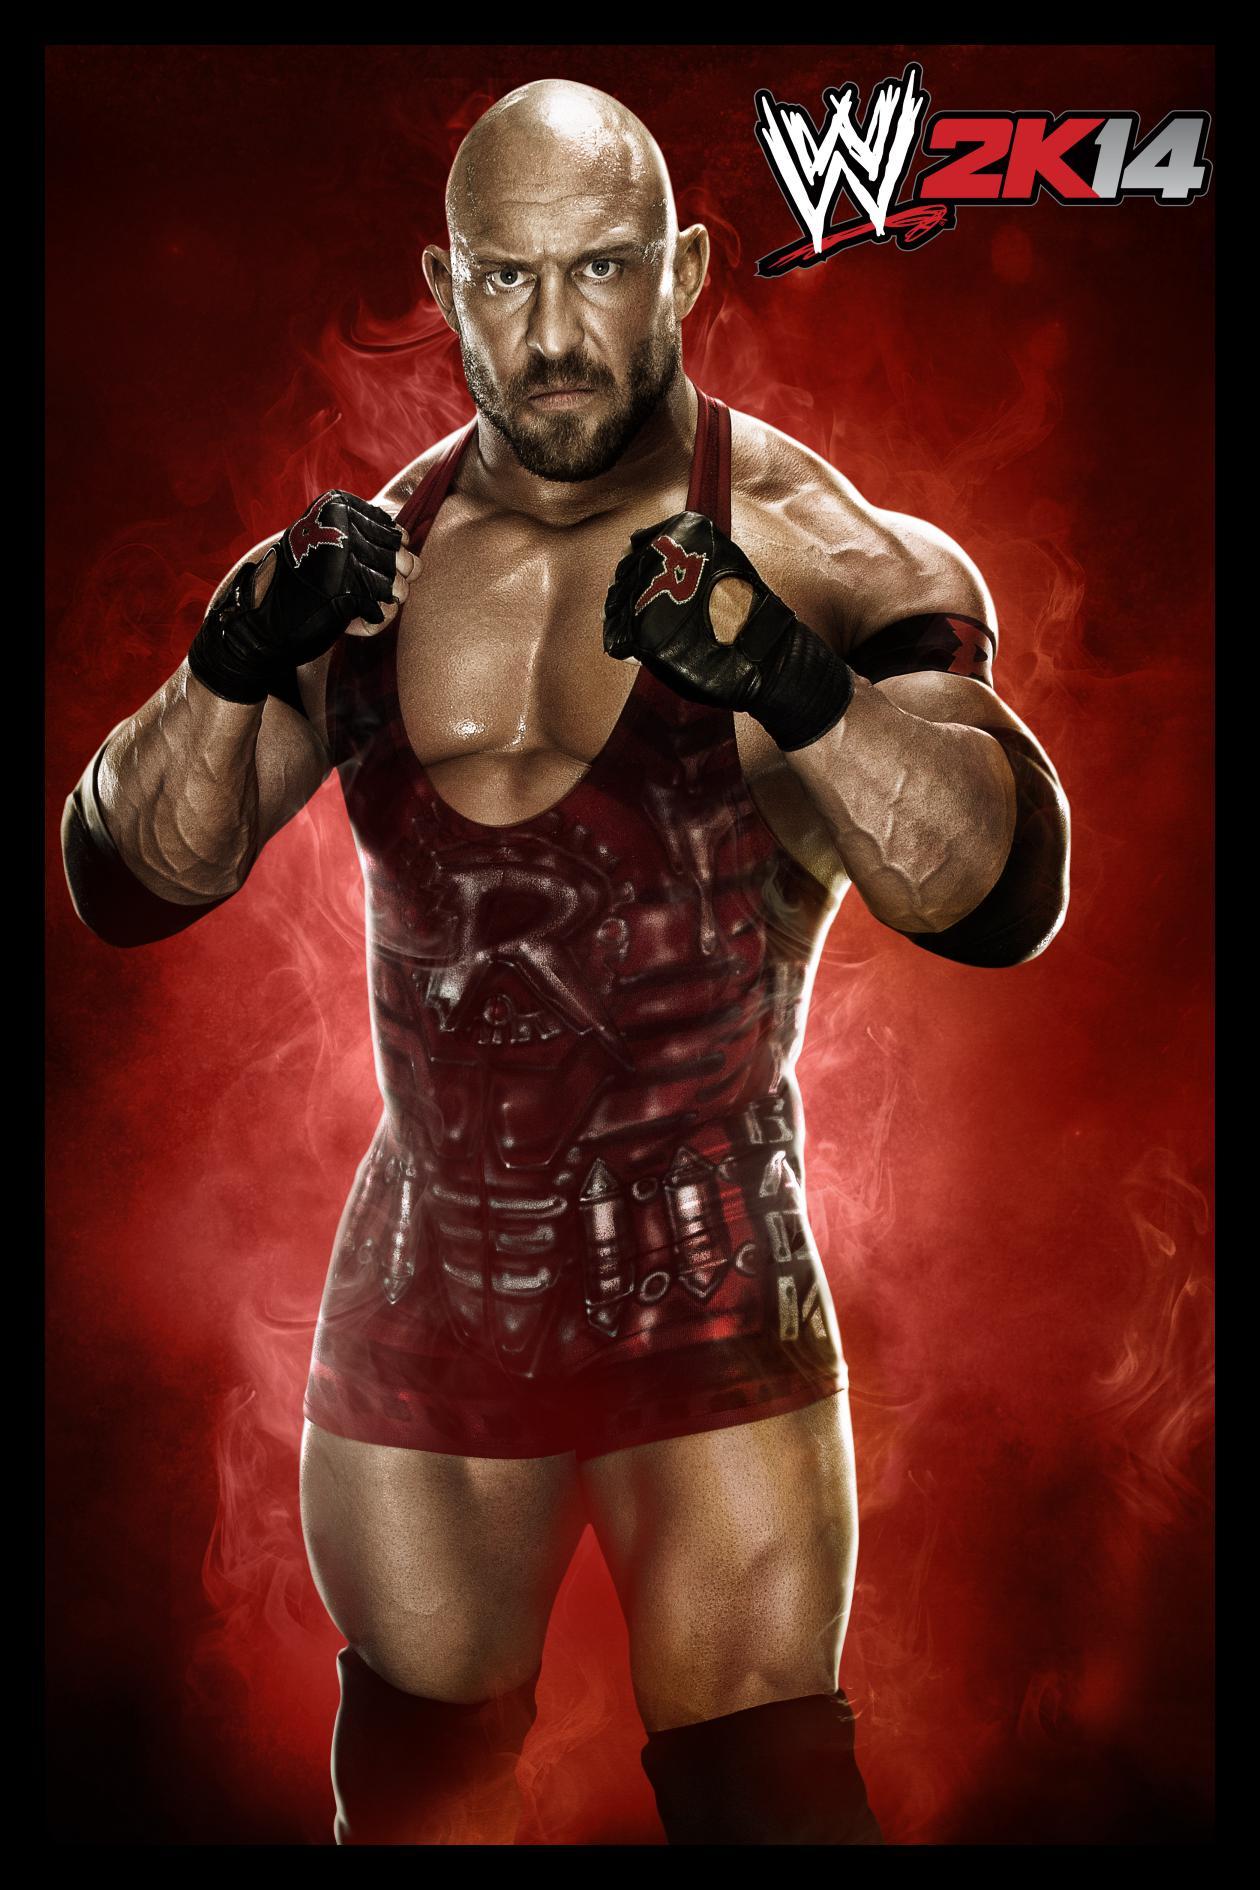 WWE 2K14's full character roster revealed, get the list & pics